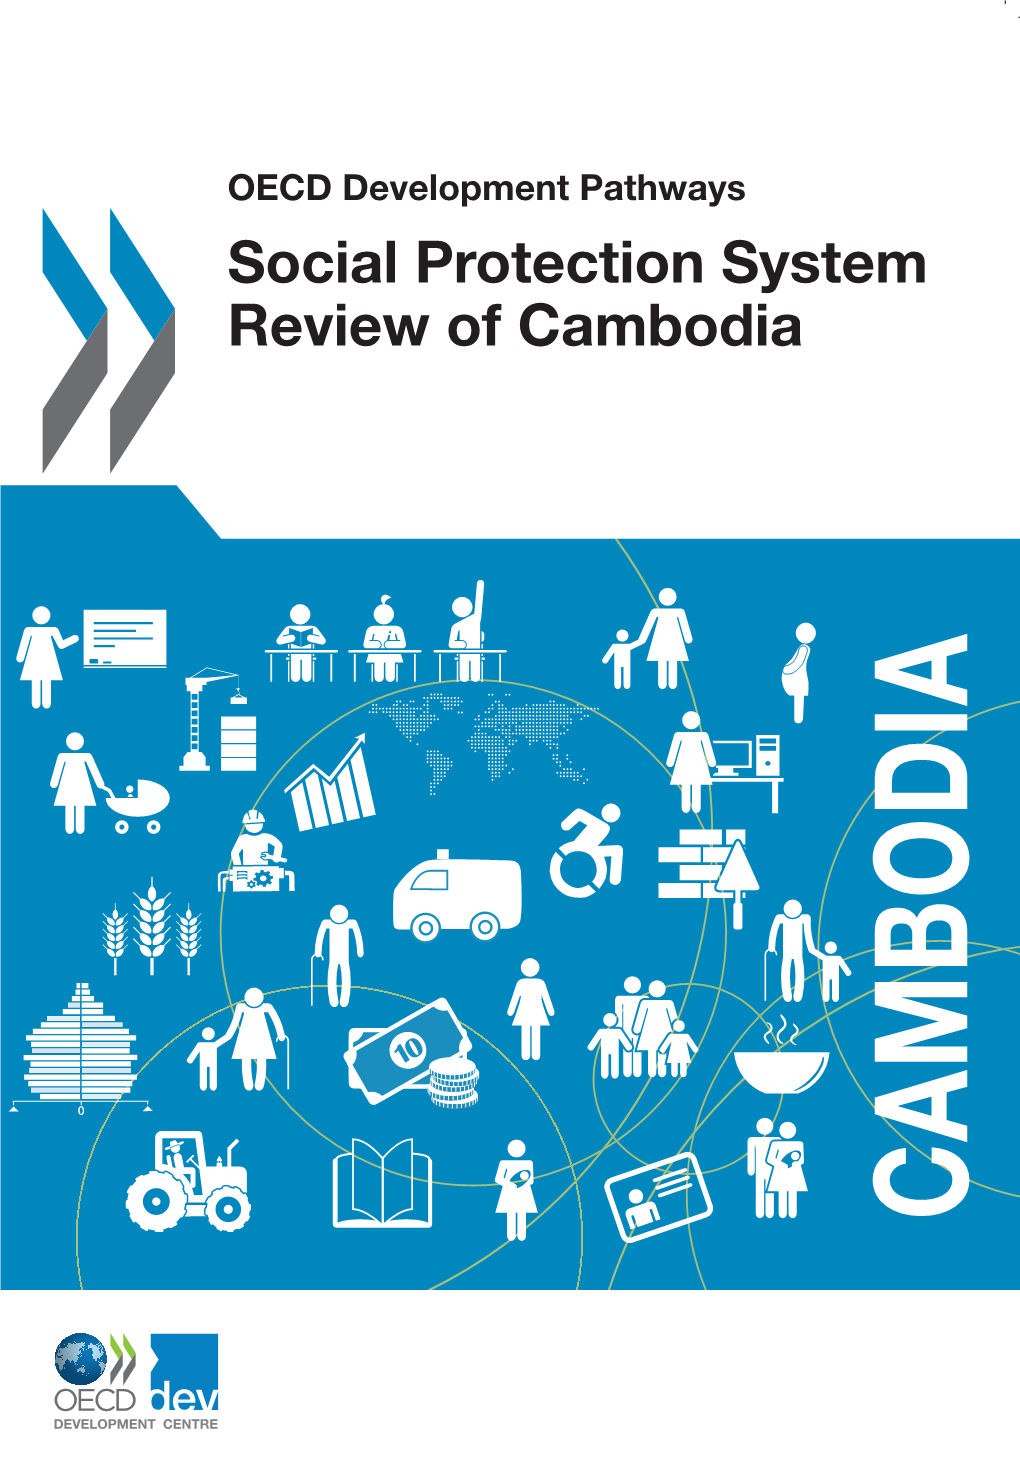 Social Protection System Review of Cambodia 41 2017 21 2017 1 P1 41 for More Information